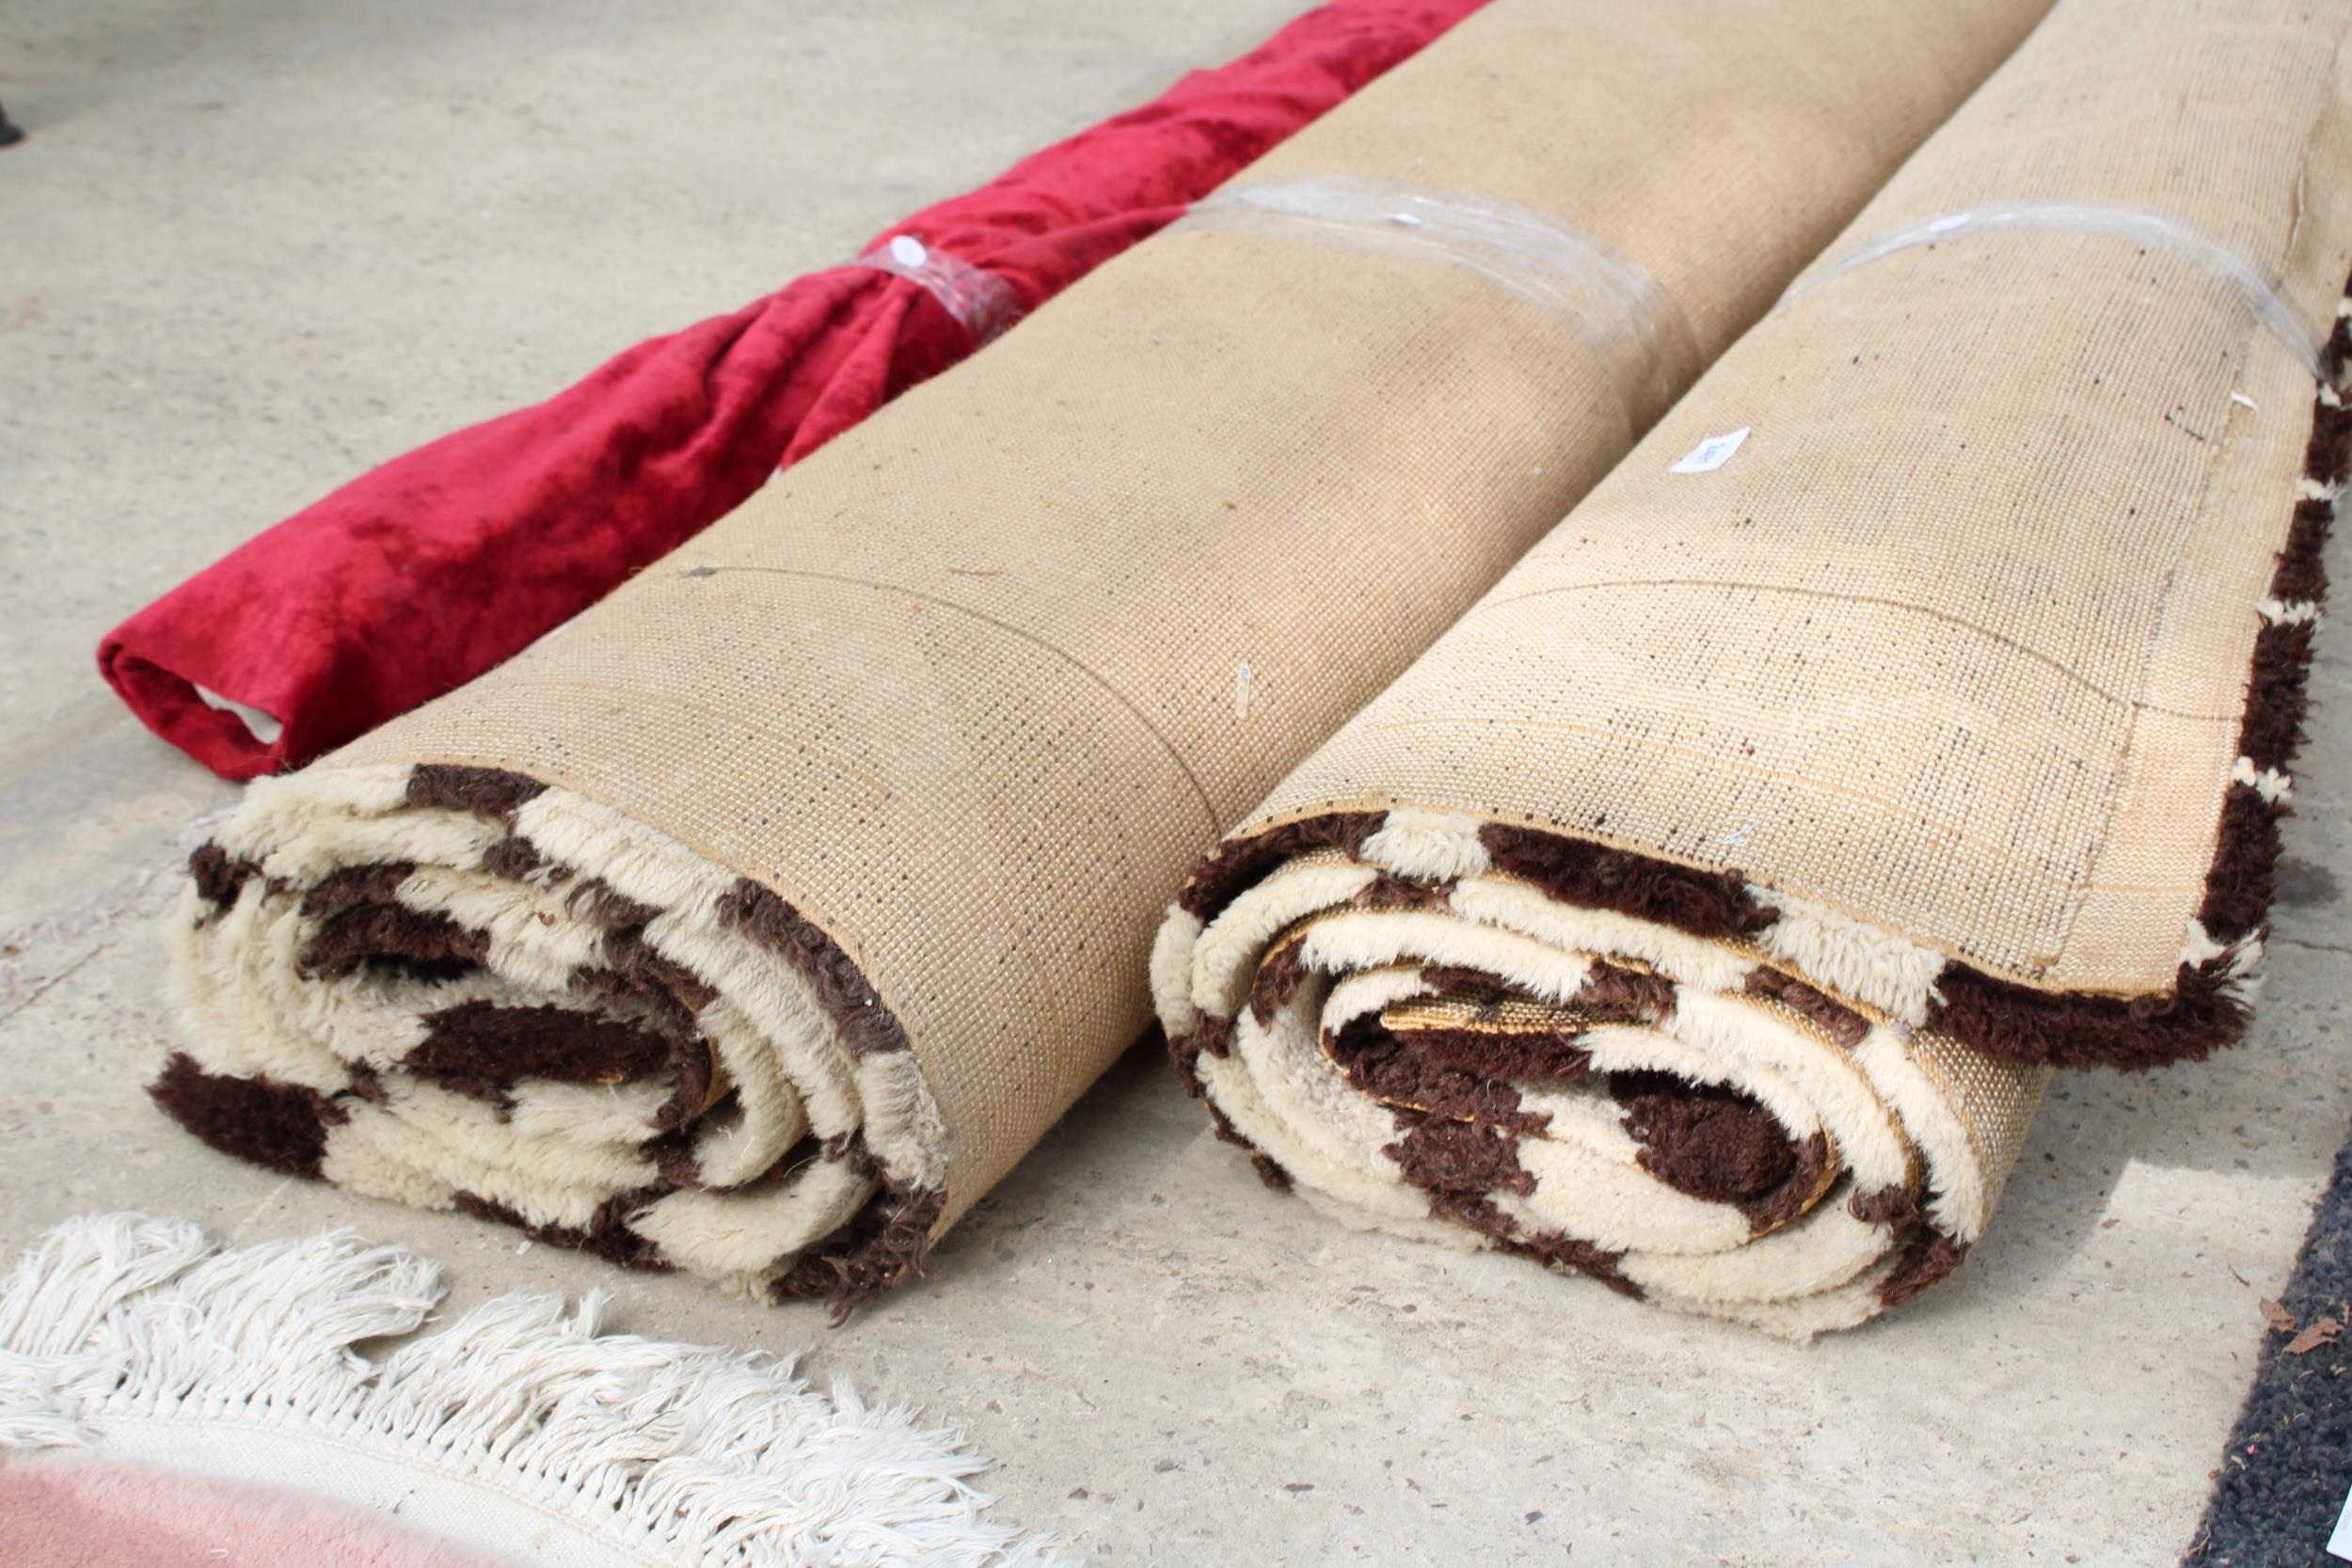 TWO LARGE BROWN PATTERNED RUGS AND A ROLL OF MATERIAL - Image 3 of 3